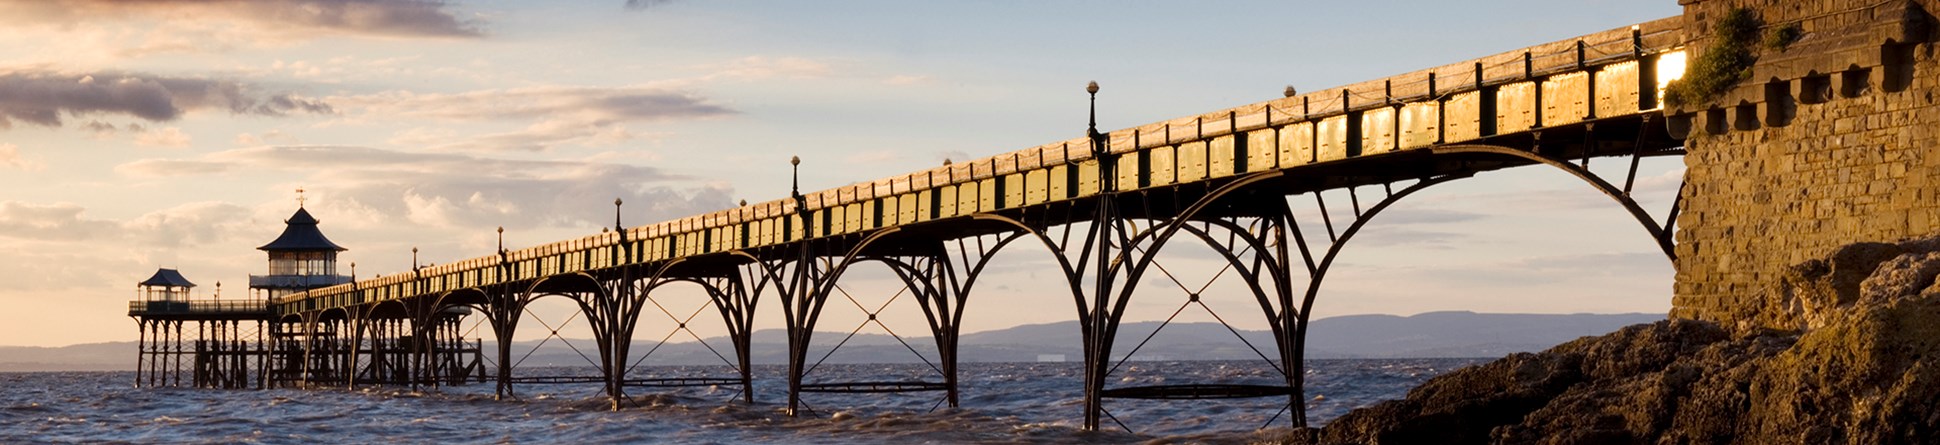 The south elevation of Clevedon Pier, taken from the beach